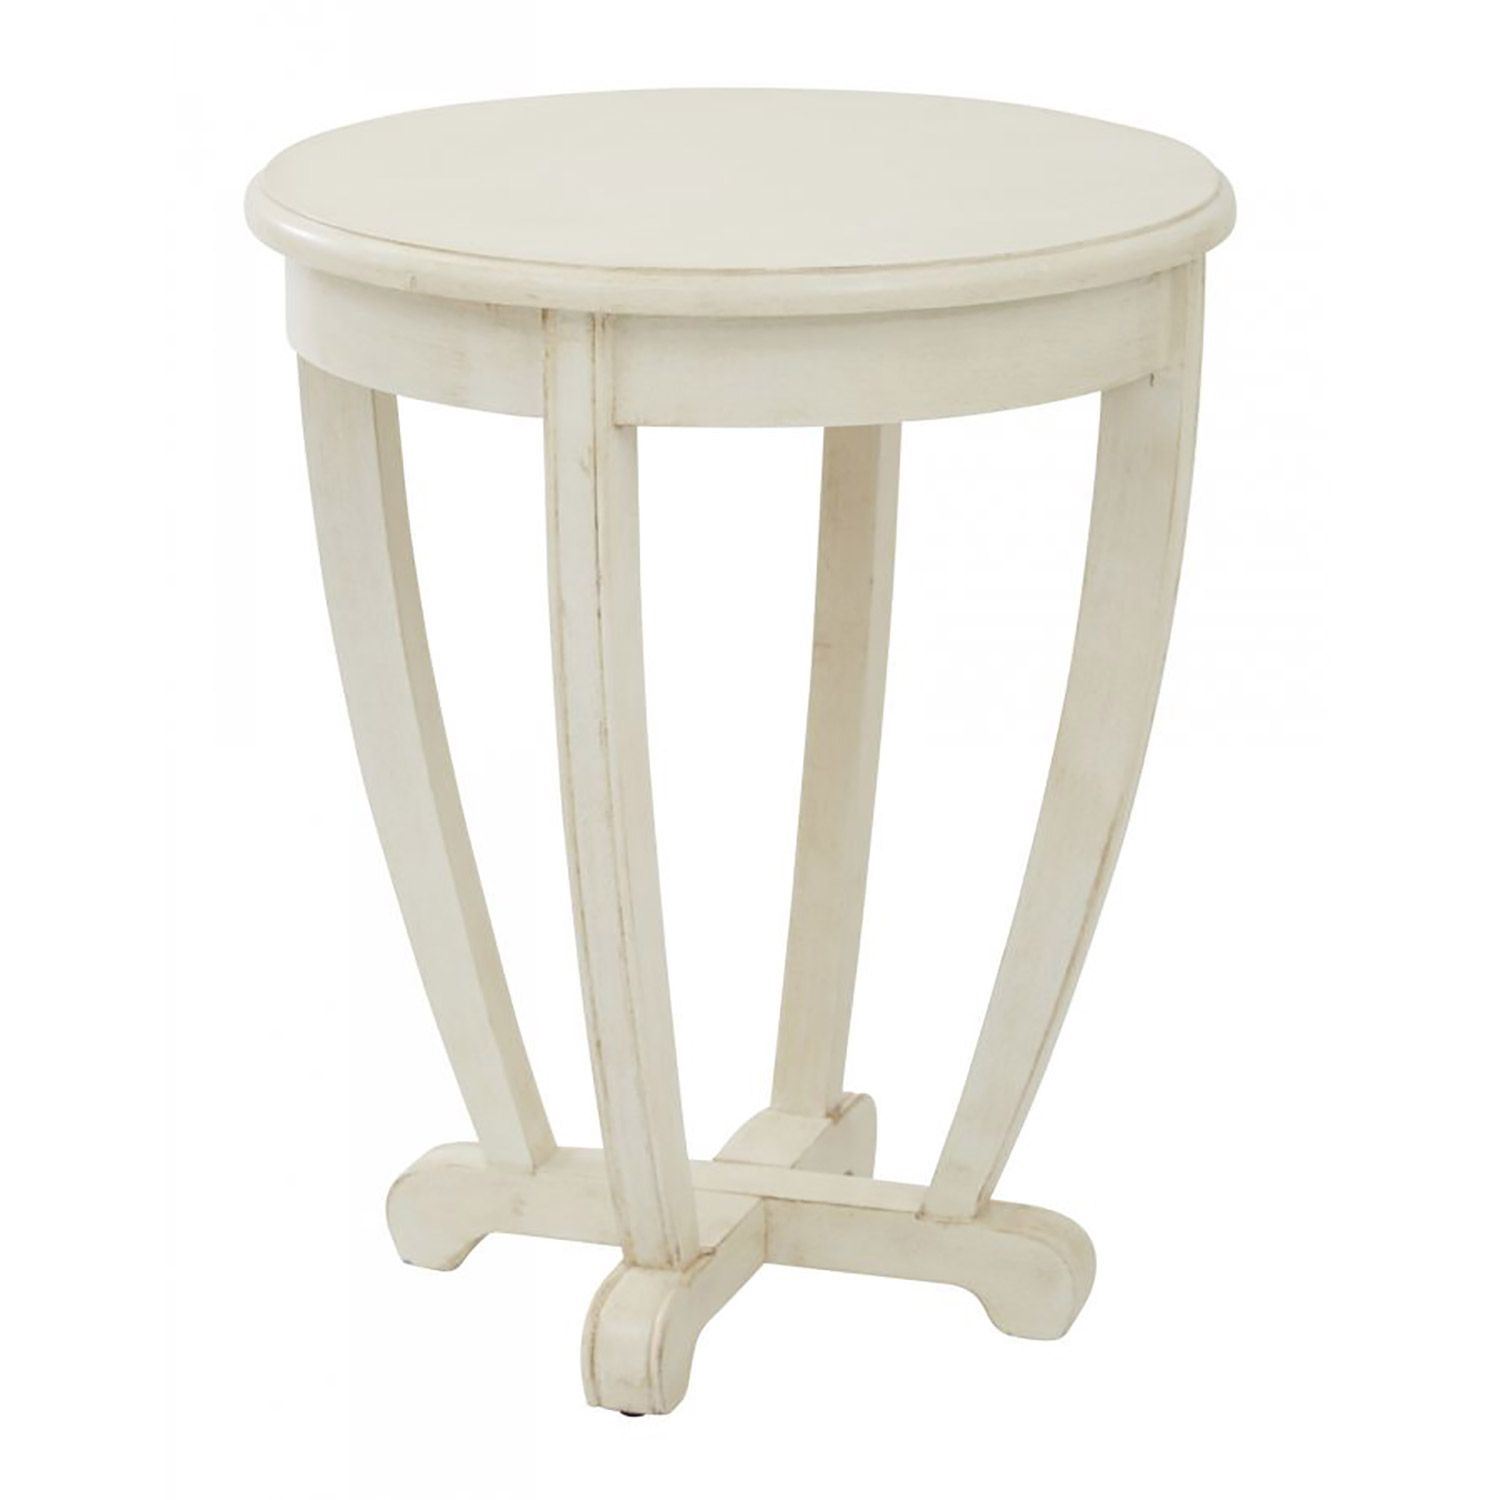 tifton cream rnd accent table office star afw ture traditional lamps half round top marble bedside centerpiece decor white corner desk rustic square coffee with storage pier wall